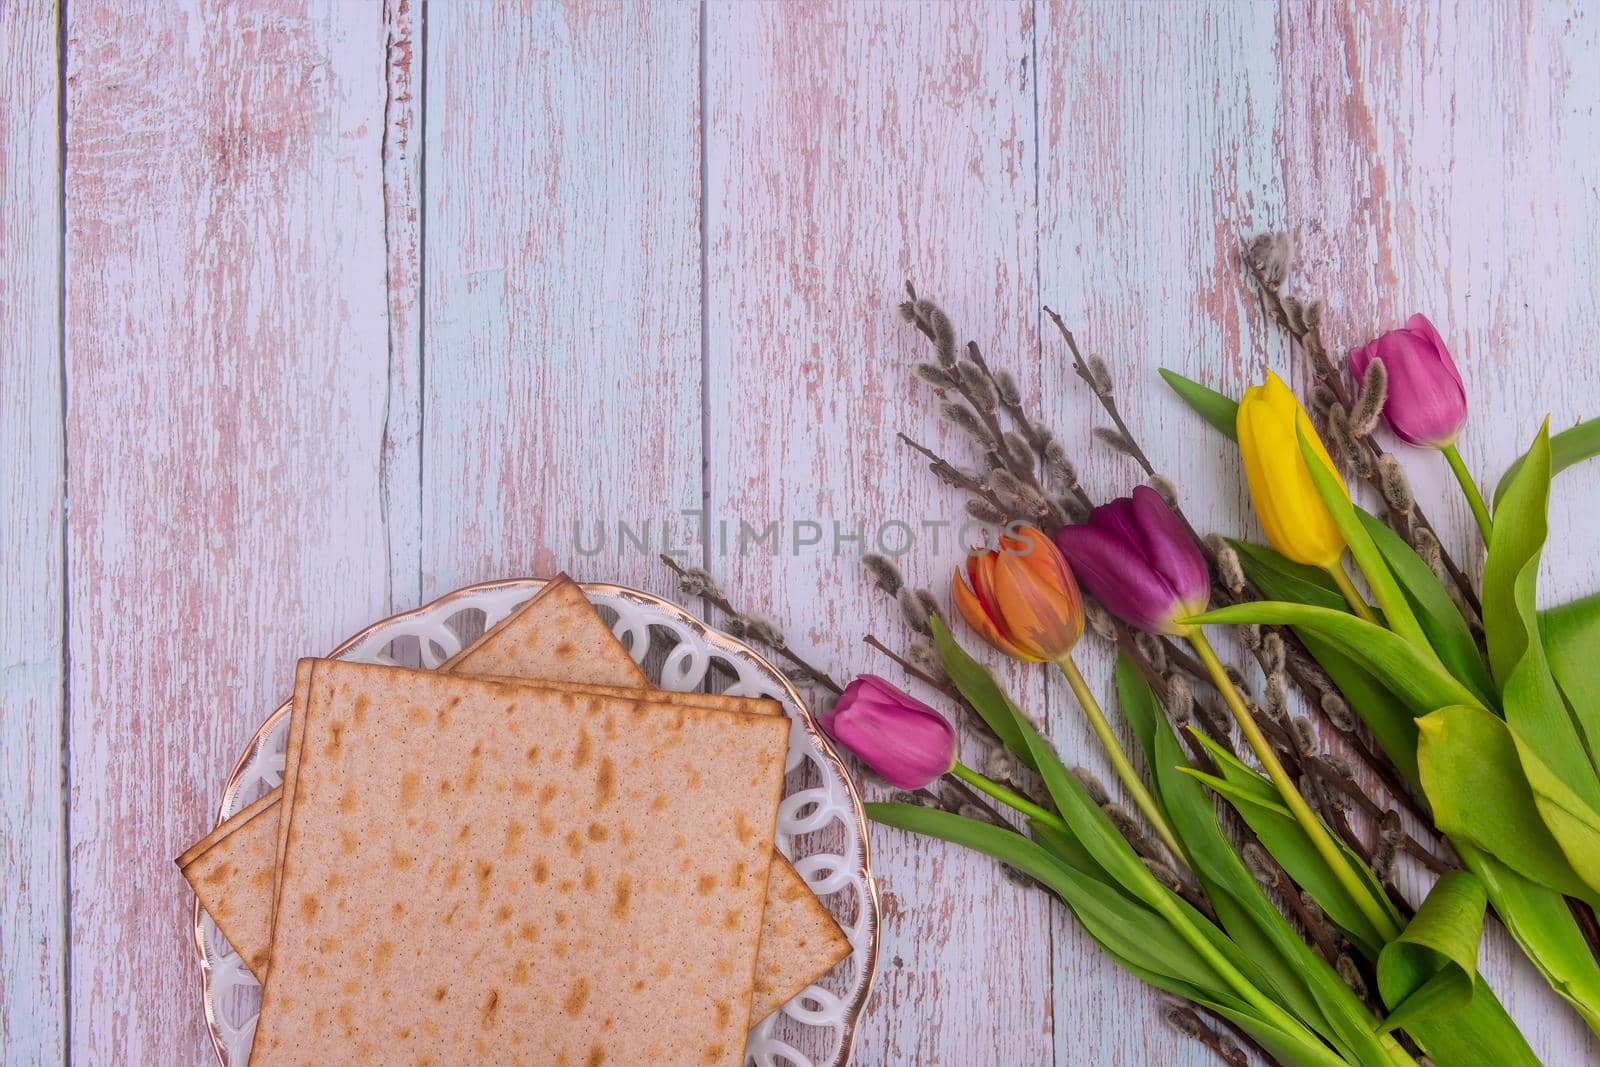 Traditional Pesach celebration Jewish holiday of kosher matzah unleavened bread for the ceremony ritual blessings on Passover